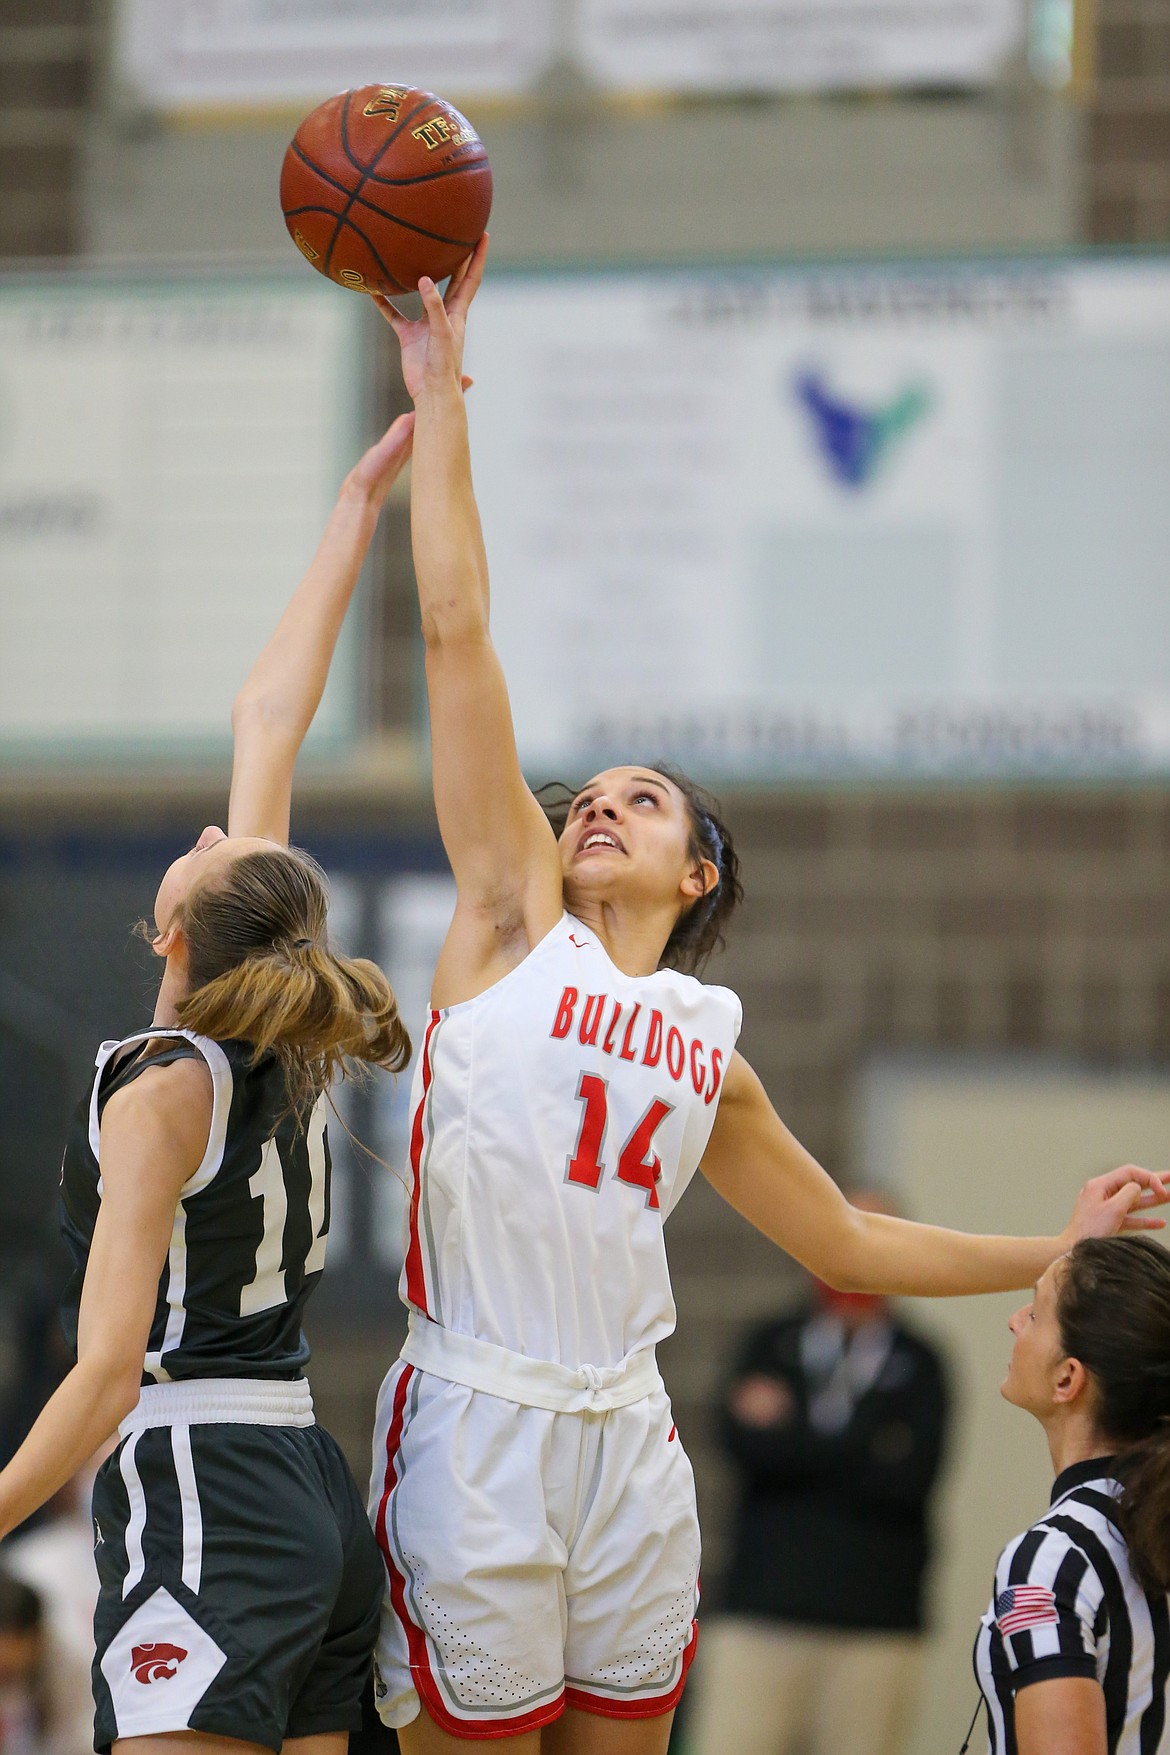 Senior Bella Phillips wins the opening tip of Sandpoint's 4A state opener against Columbia on Feb. 18.